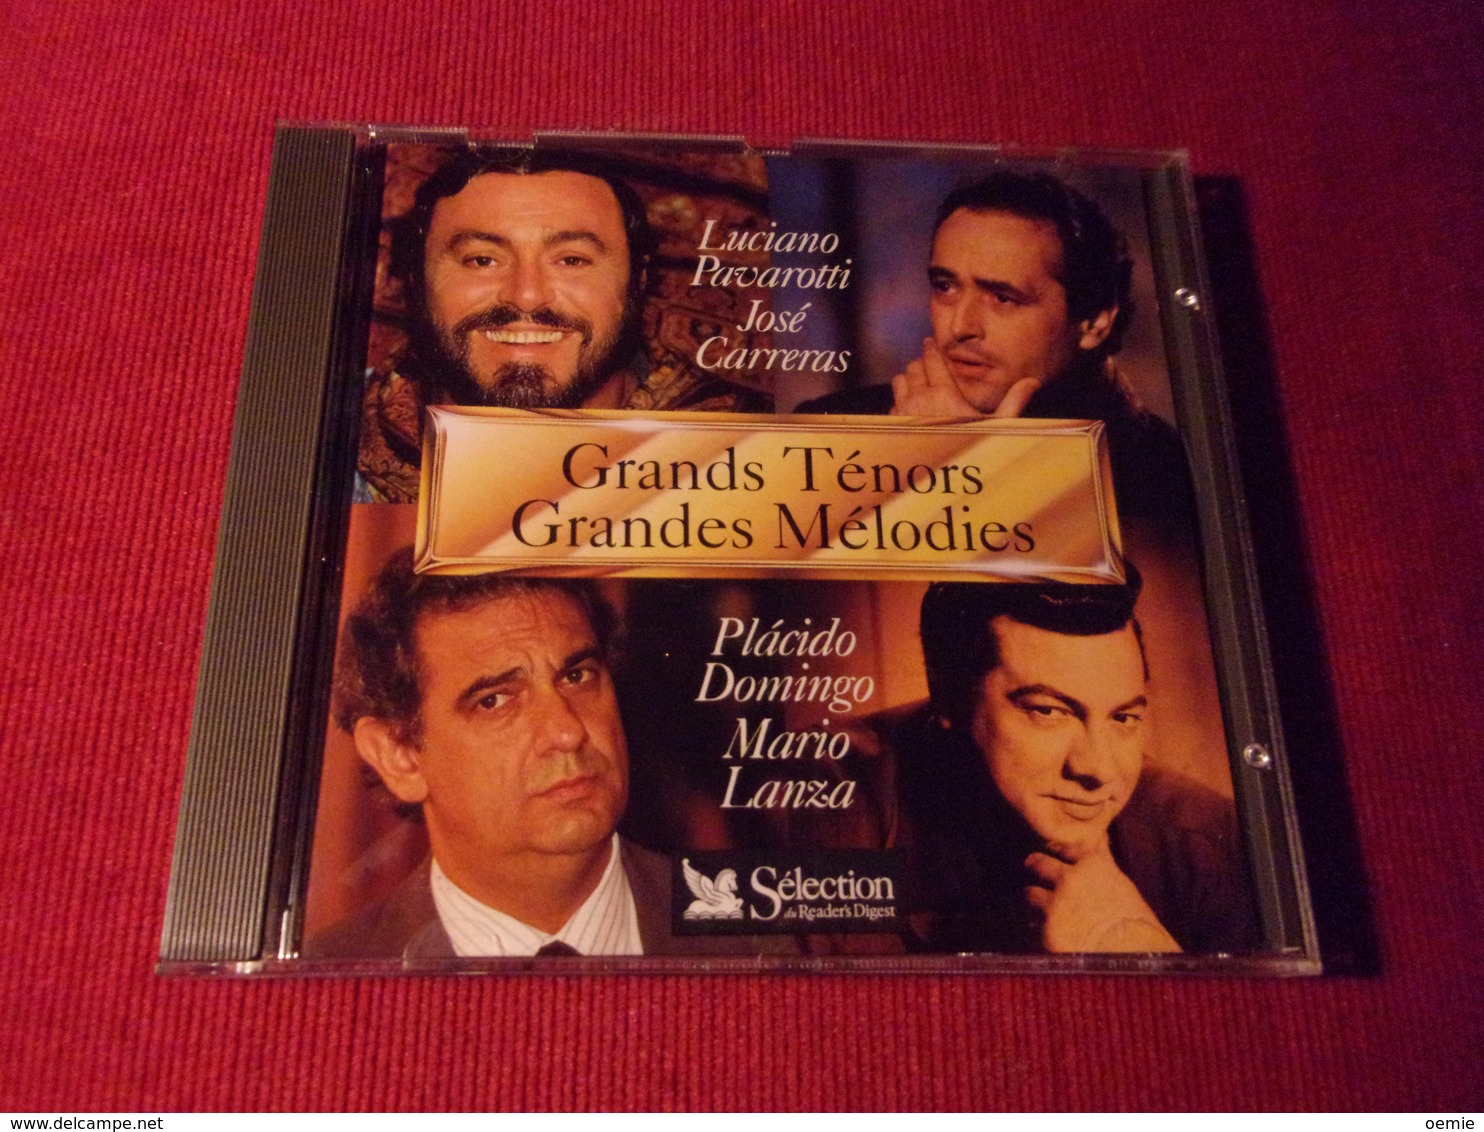 SELECTION DU READER'S DIGEST  °° LES GRANDS TENORS GRANDES LUCIANO PAVAROTTI  CD DUREE TOTALES 67 Mn 01 - Opera / Operette